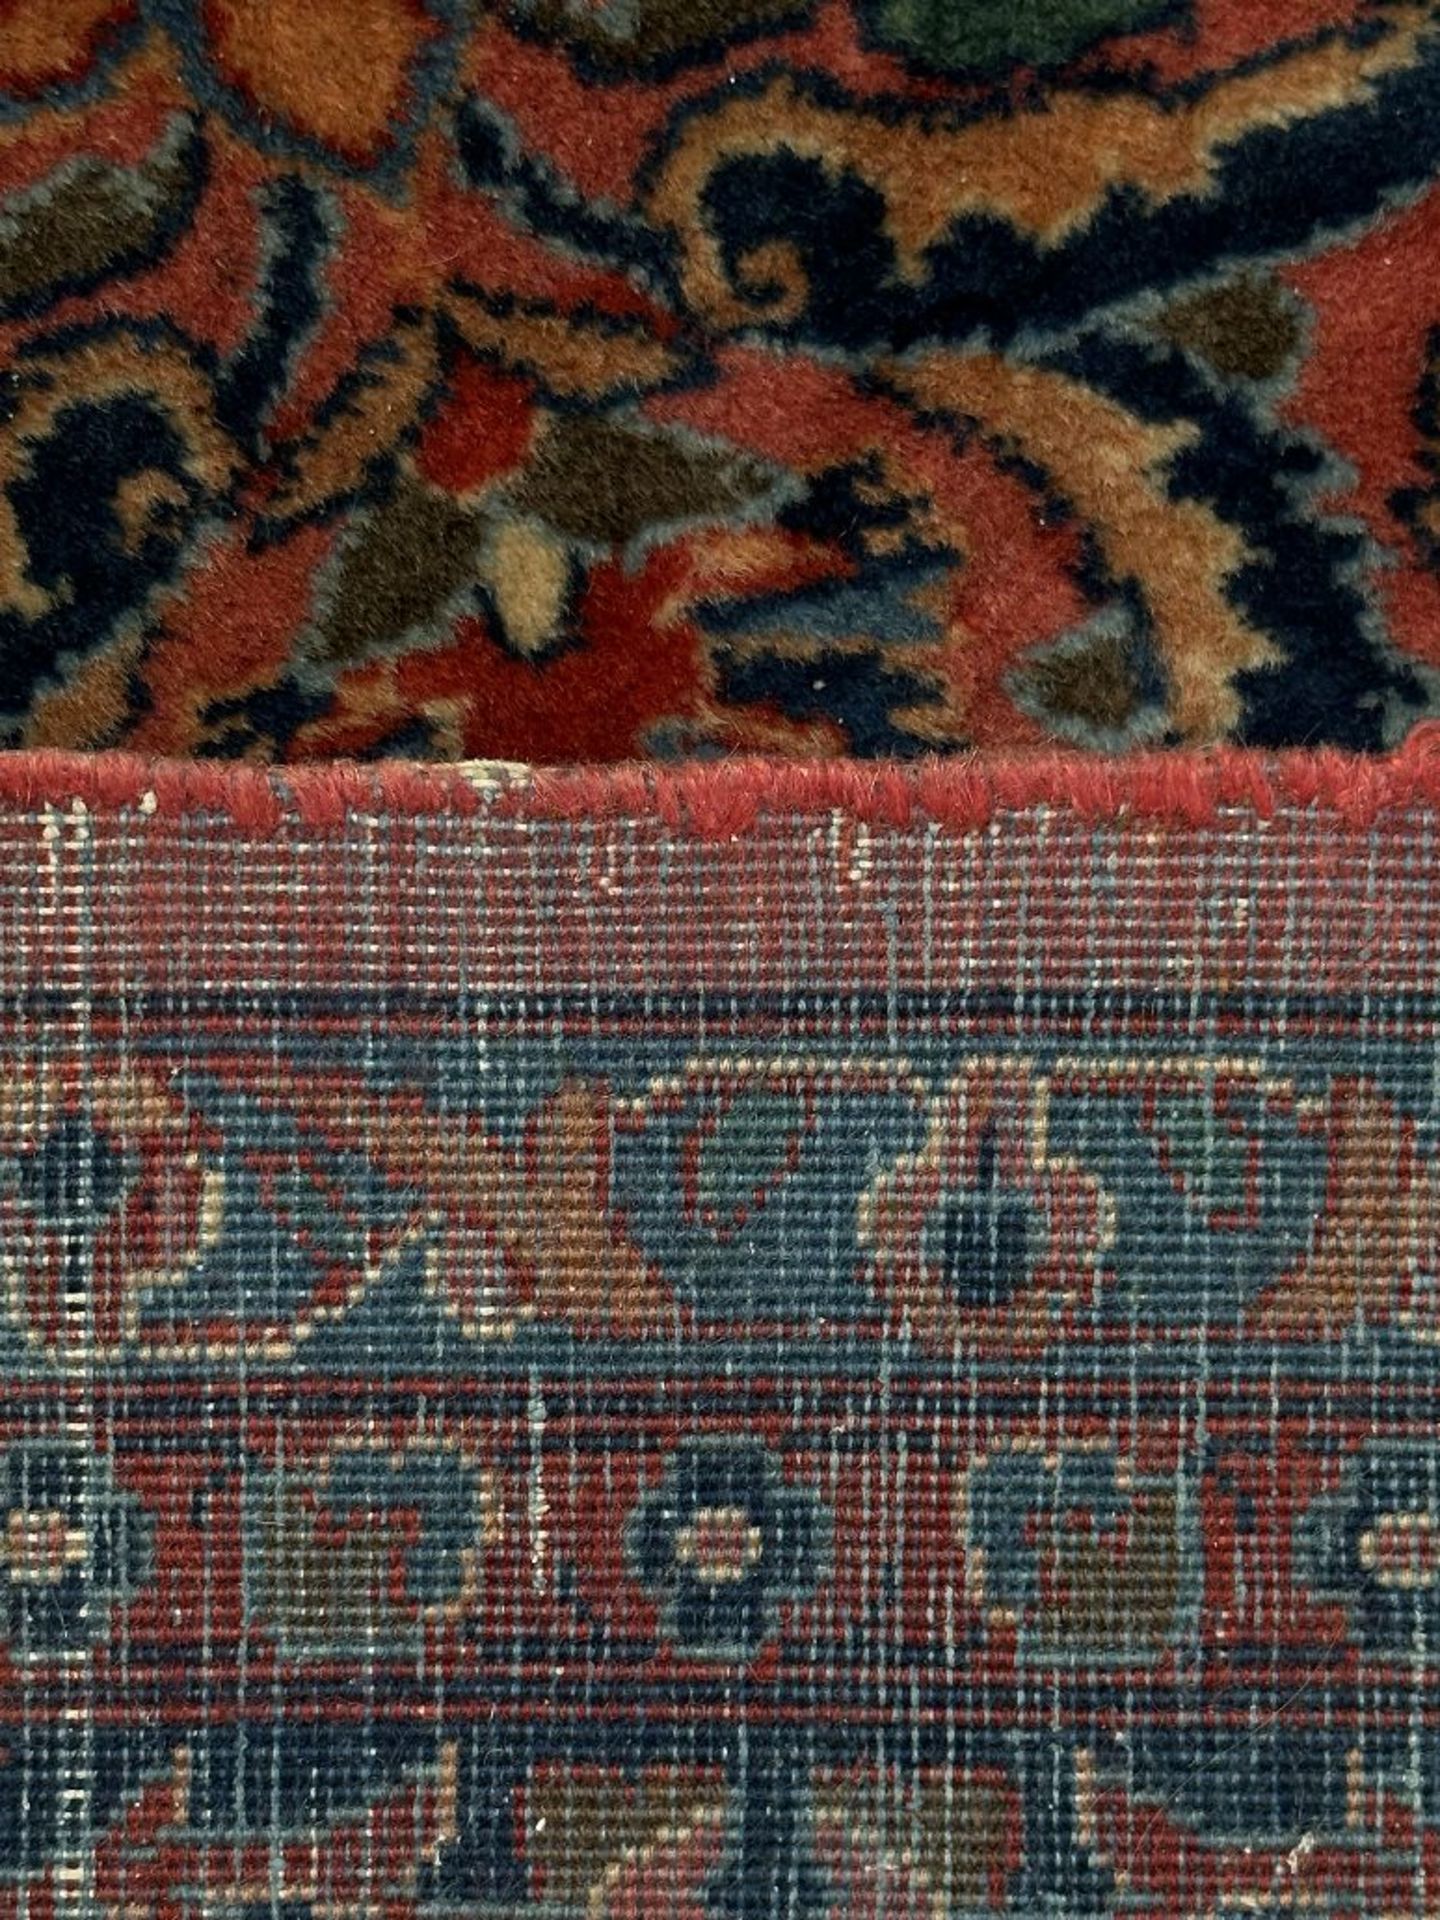 Persian rug with floral decoration on a red background - Image 4 of 4